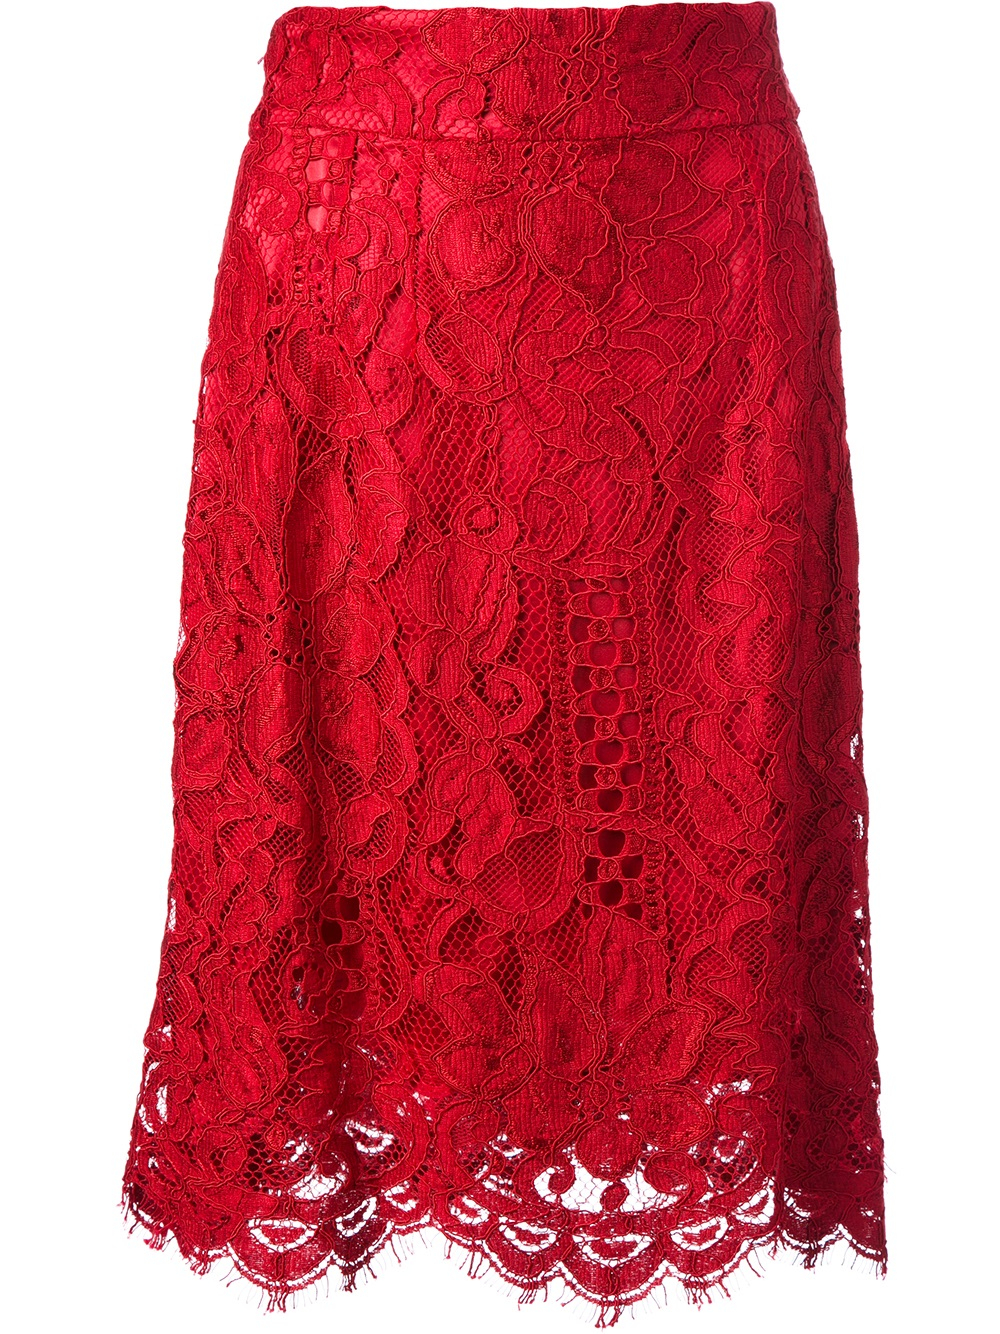 Dolce & Gabbana Lace Skirt in Red - Lyst